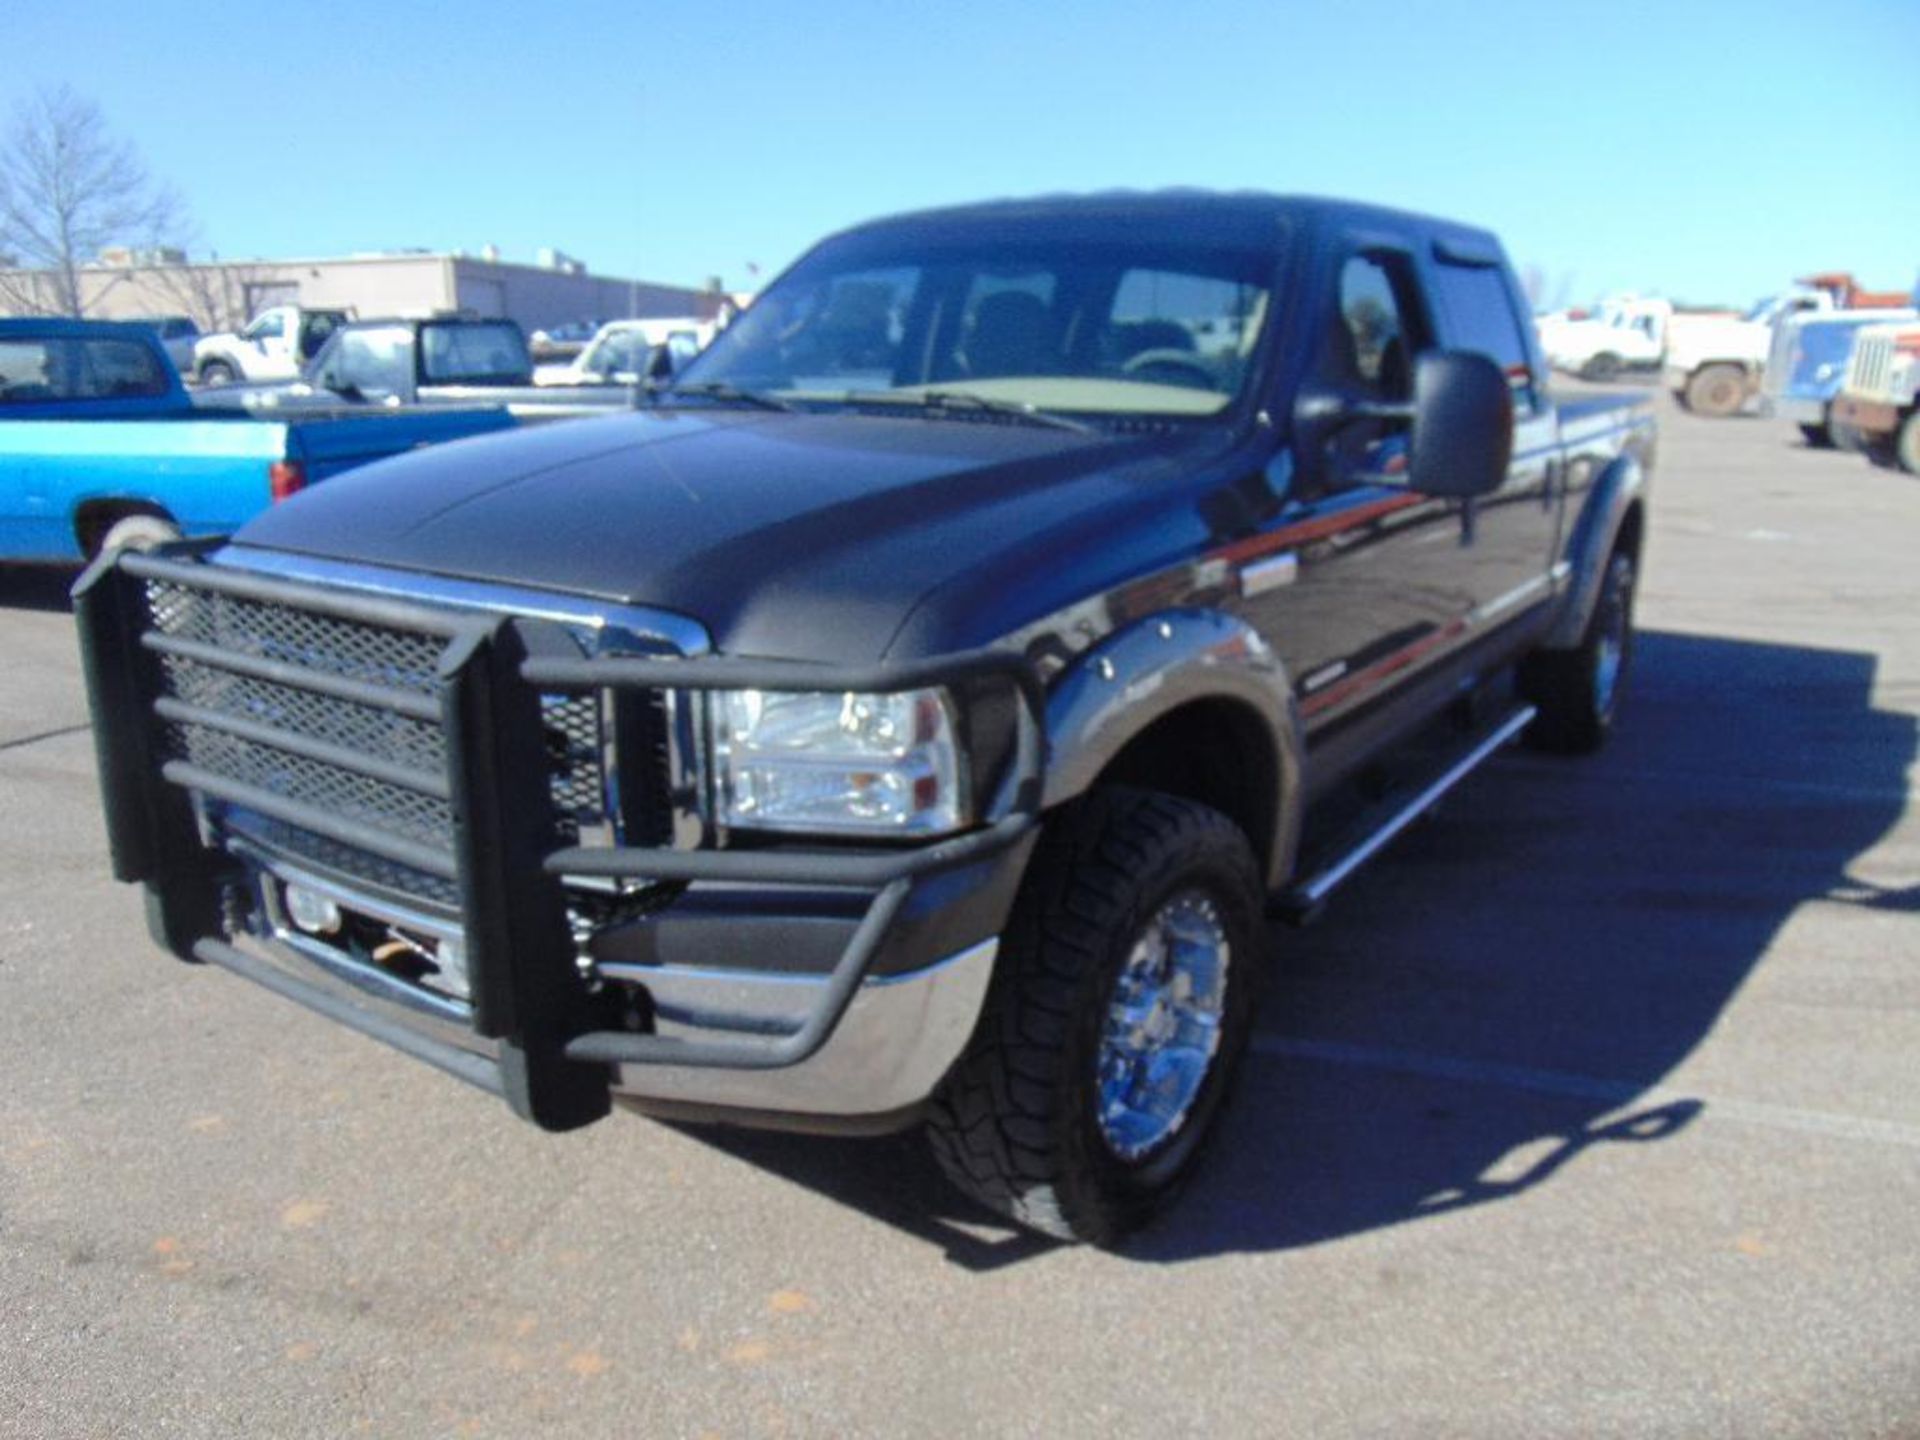 2005 Ford F250 4x4 Pickup s/n 1ftsw21p15ec00636, pwr stroke eng,auto, Lariat, - Image 3 of 3